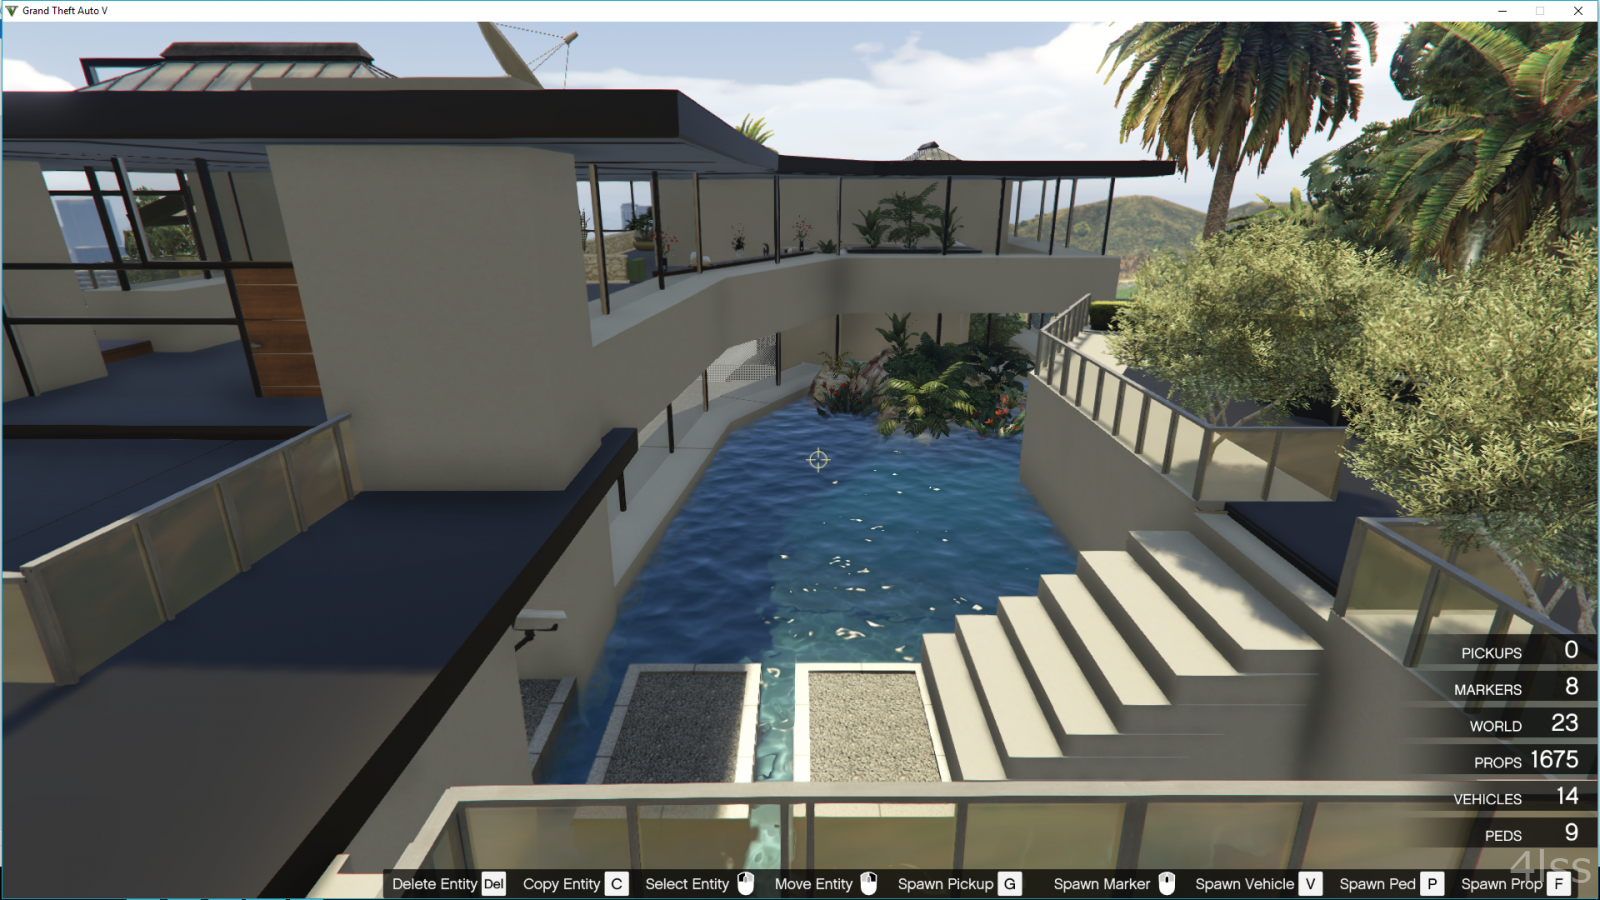 Most Expensive House In Gta 5 Online Most Expensive House In Gta 5 Online - Margaret Wiegel